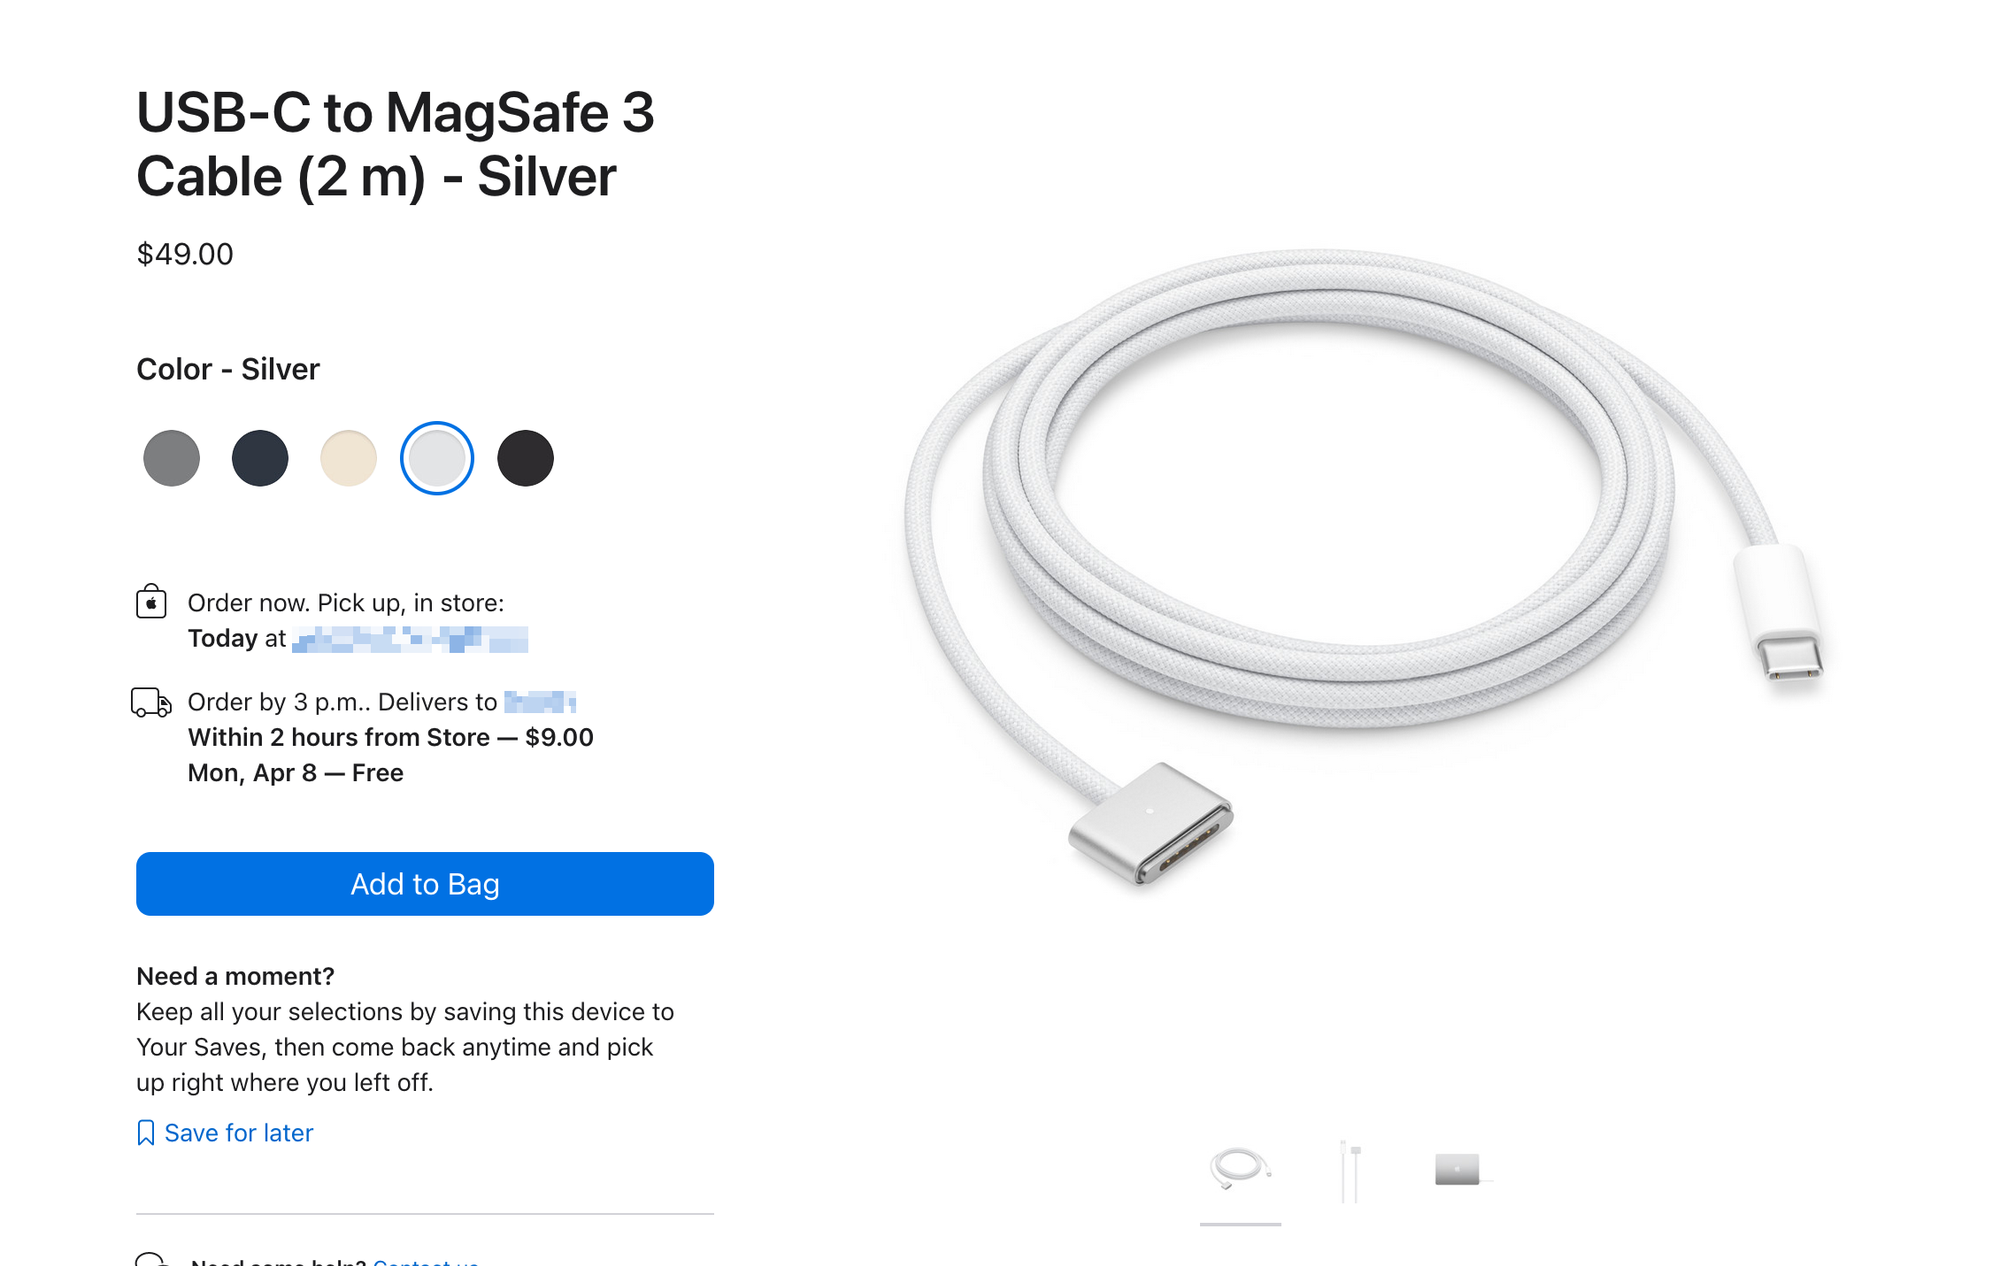 screenshot of apple store product page, USB-C to MagSafe 3 Cable (2 m) - Silver $49.00 Color - Silver